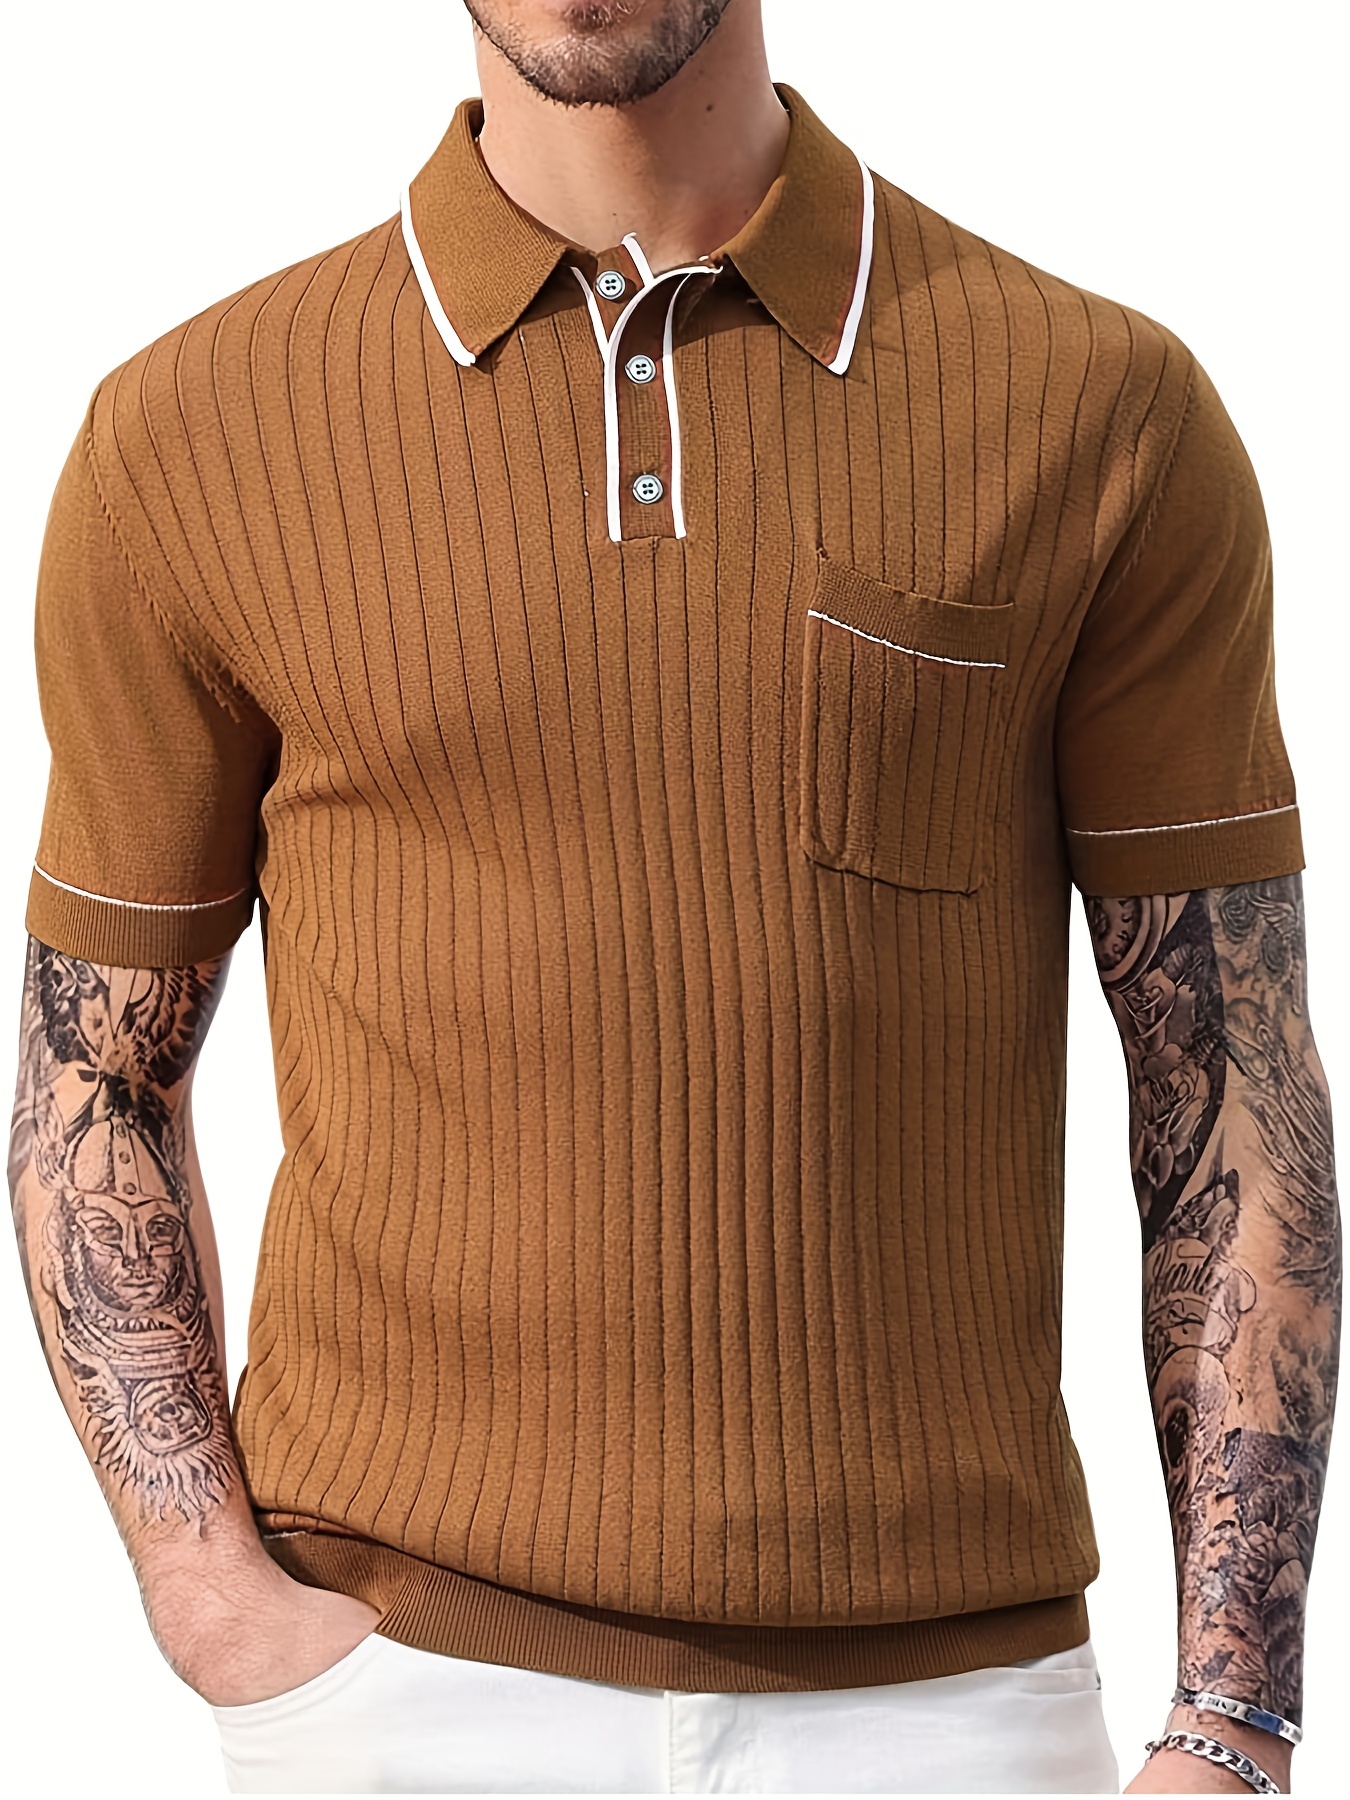 Men's Vintage Knitted Polo Shirts Short Sleeve Golf Knit Polo Shirt